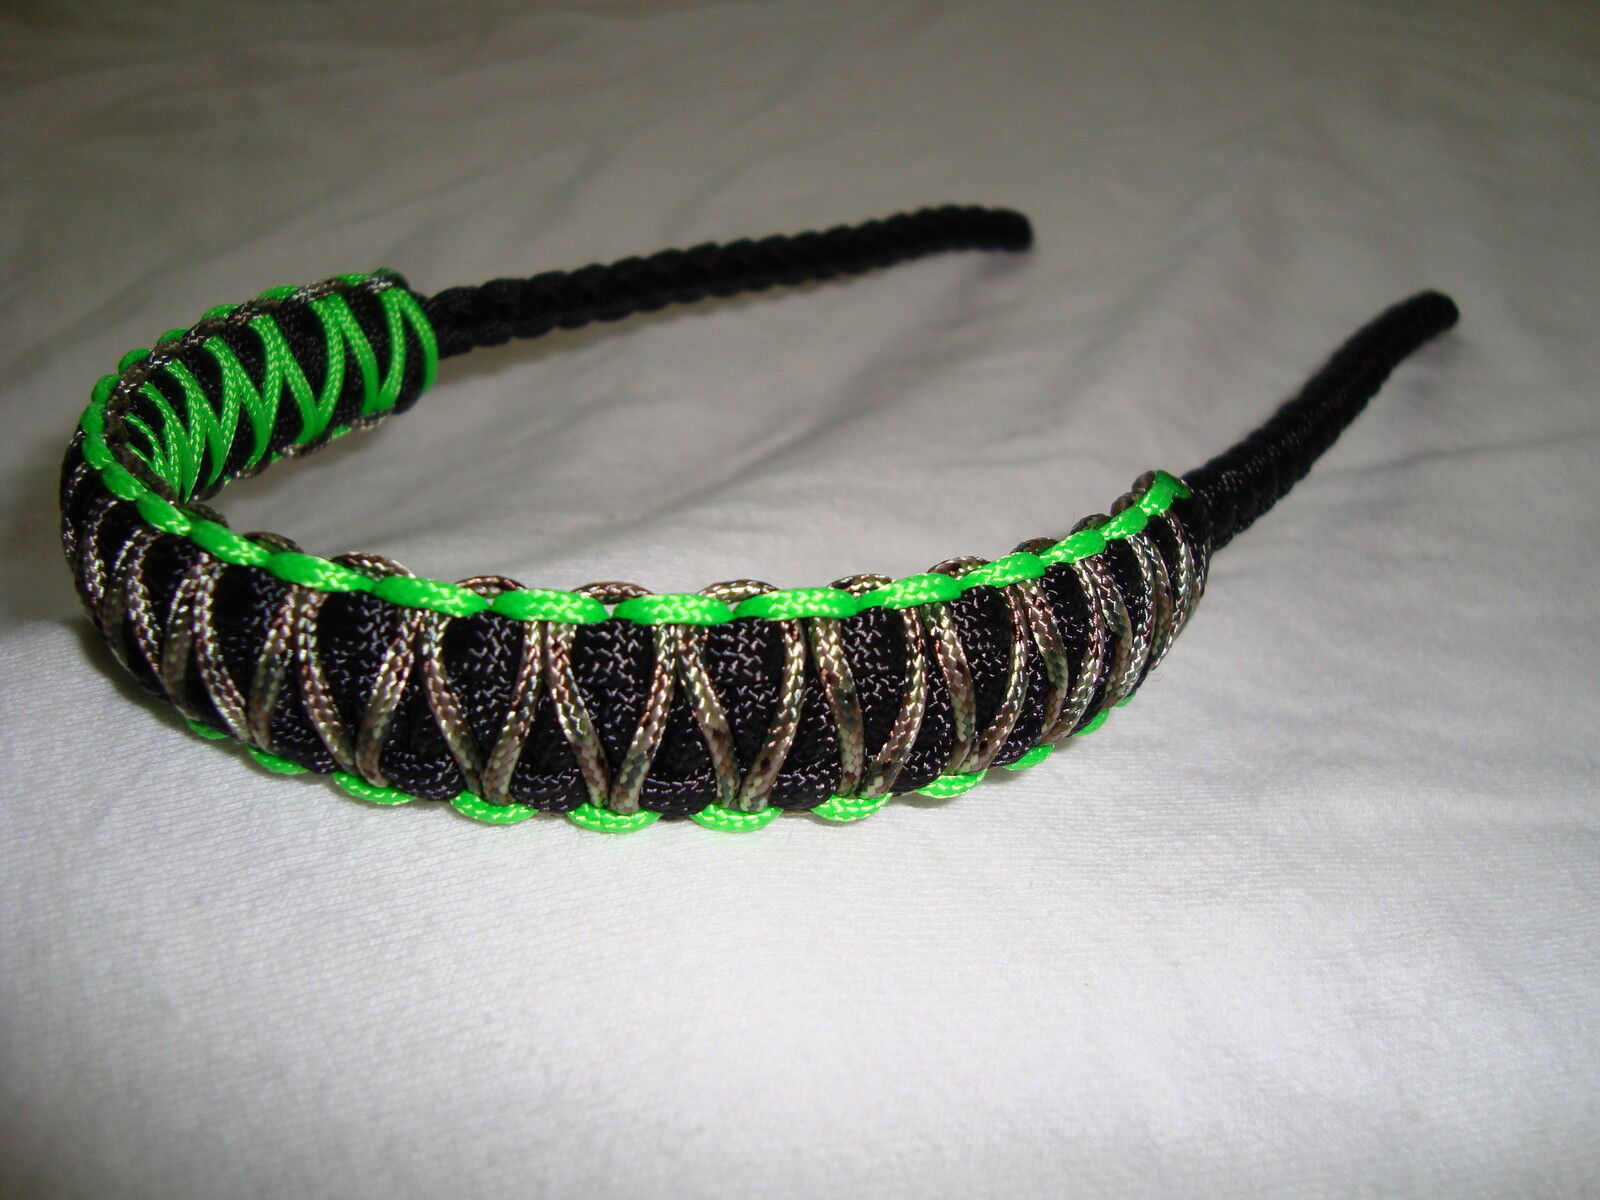 All items in the store Bow Wrist Sling in Black w Colorado Springs Mall Neon and Multicamo f Green Overbraid